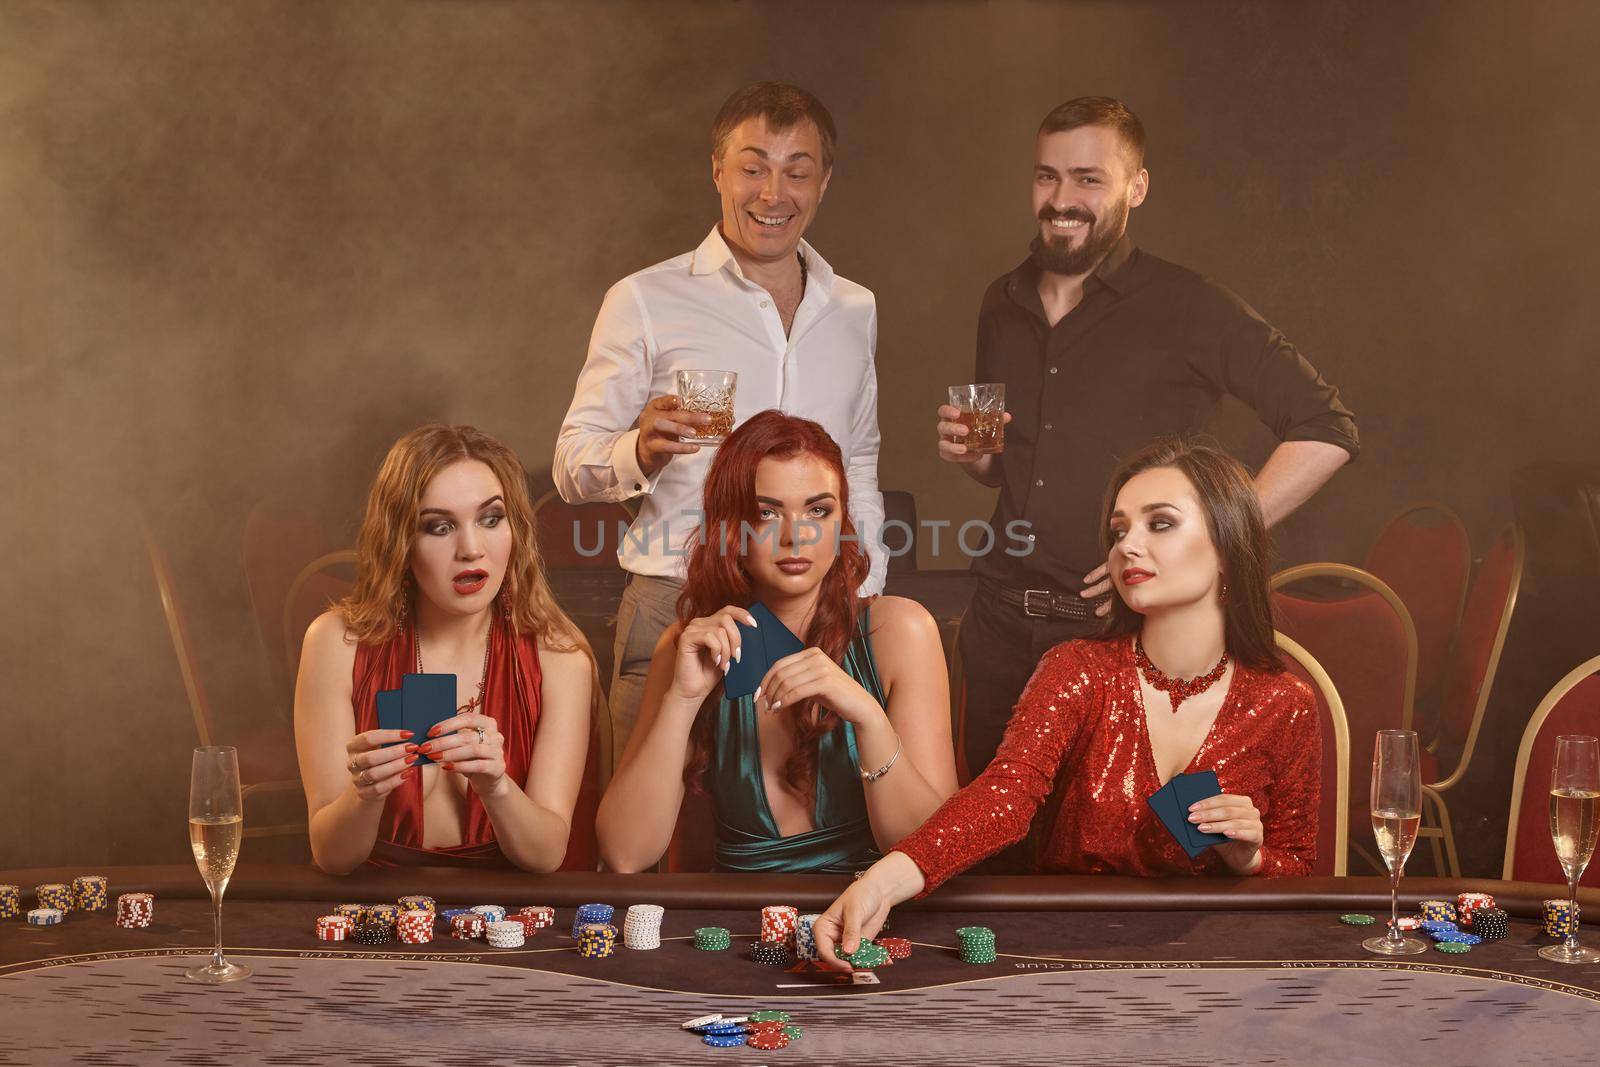 Concentrated friends are playing poker at casino. Golden youth are making bets waiting for a big win while posing at the table against a dark smoke background. Cards, chips, money, fortune, alcohol, gambling, entertainment concept.